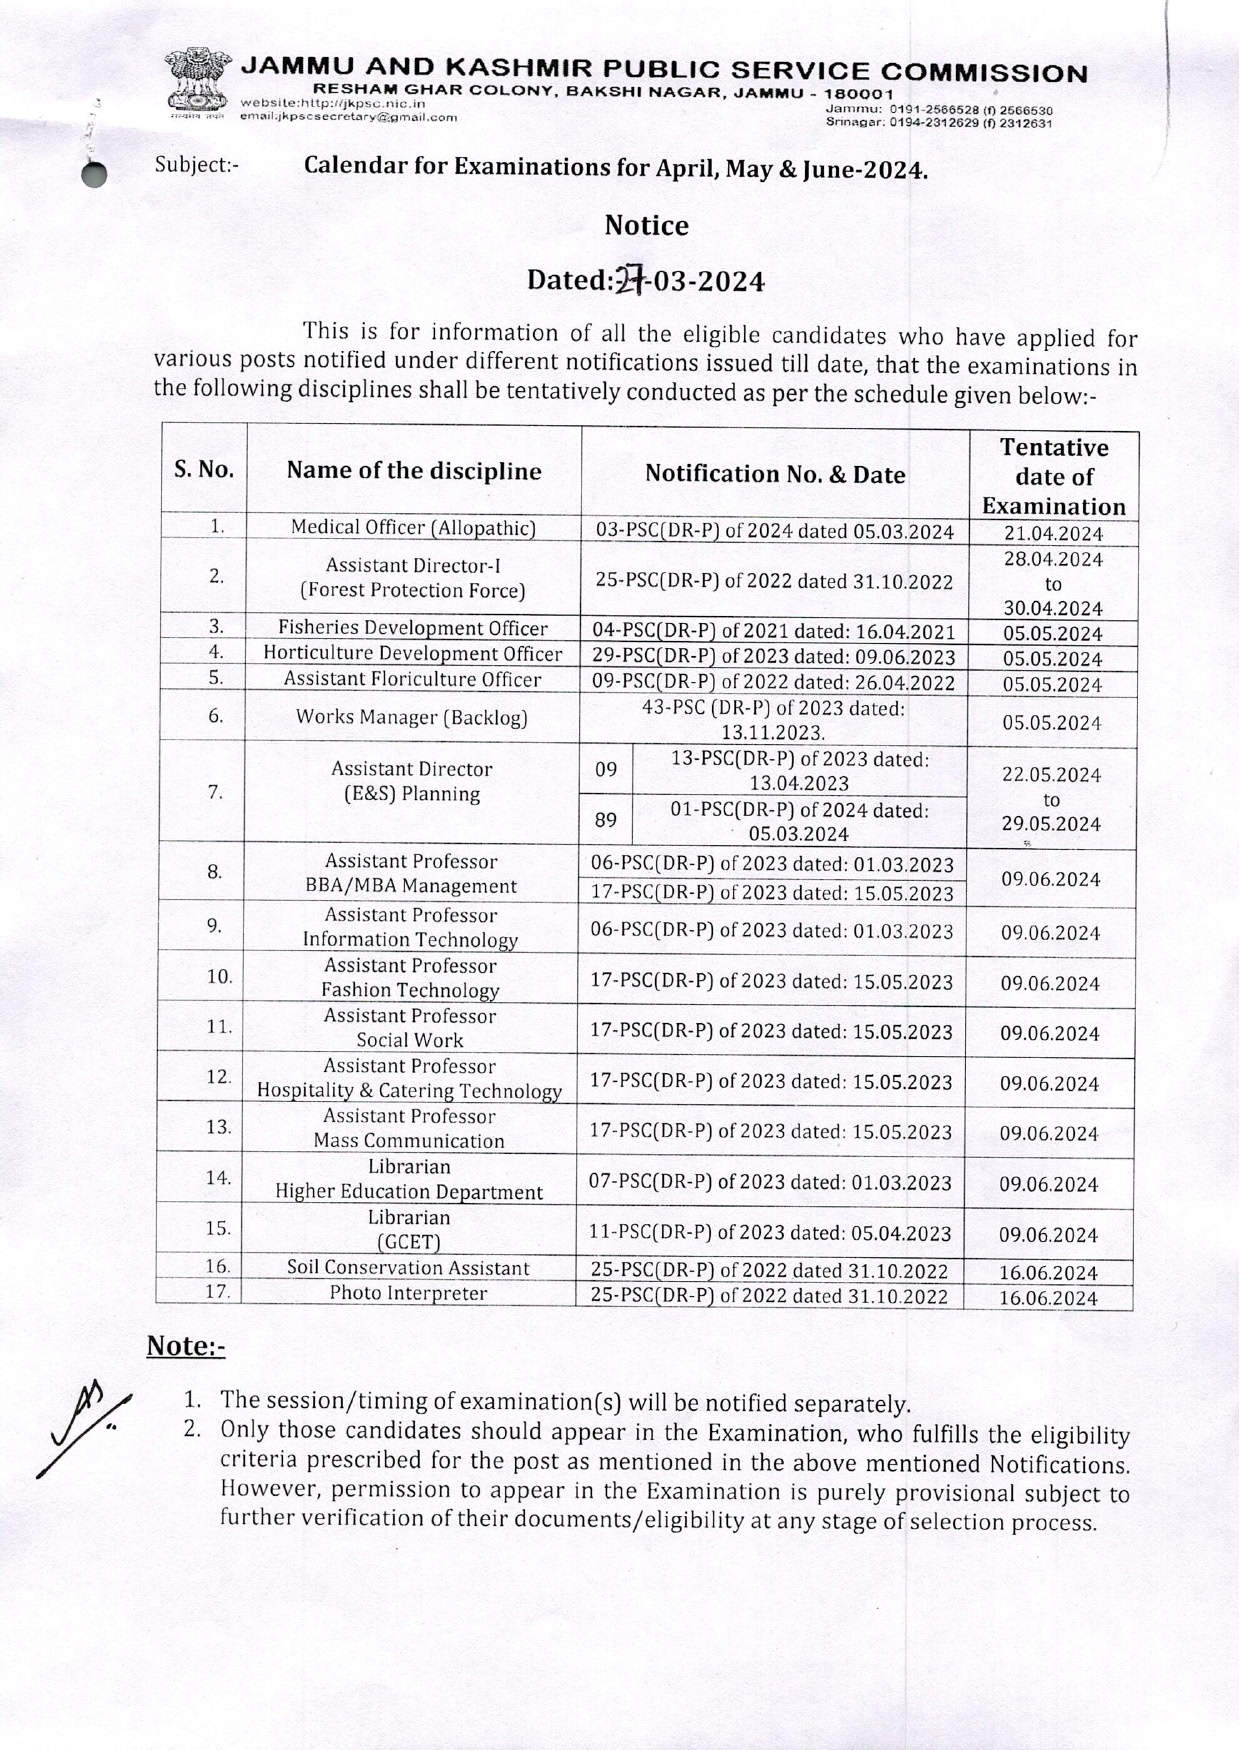 JKPSC notification for Calendar for Examination for April, May and June-2024